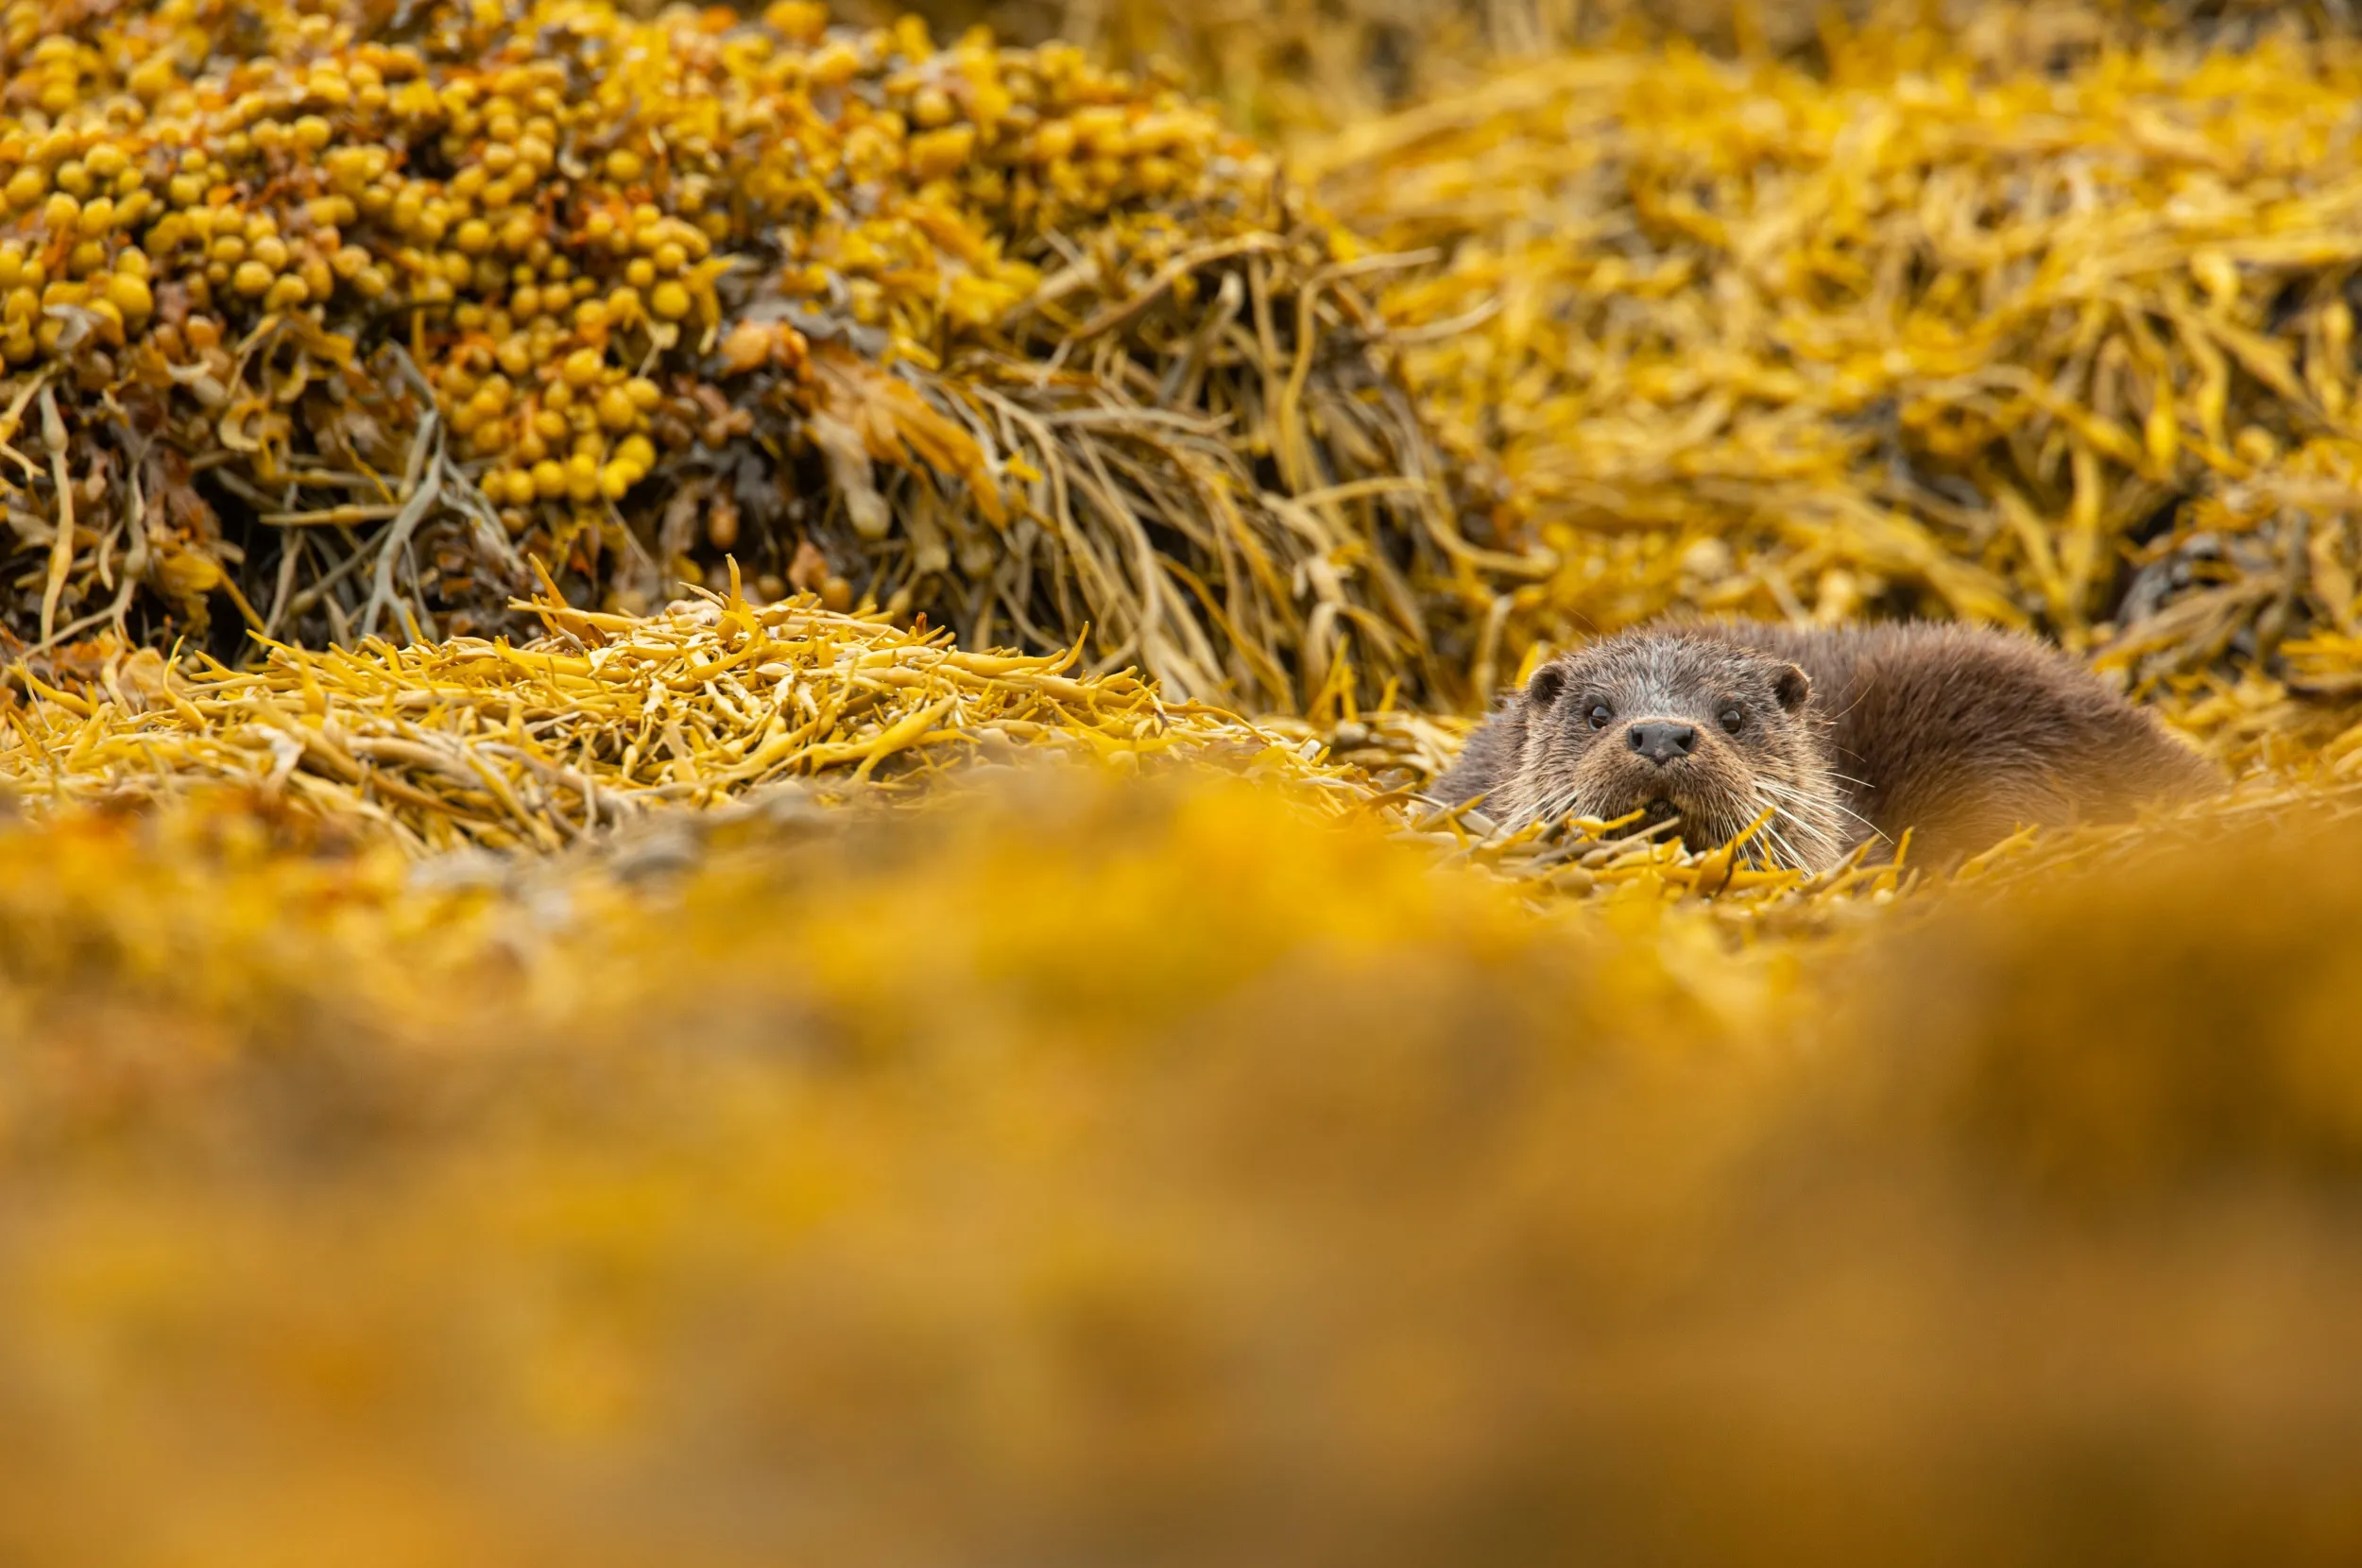 An Otter, laying in a bed of yellow seaweed.